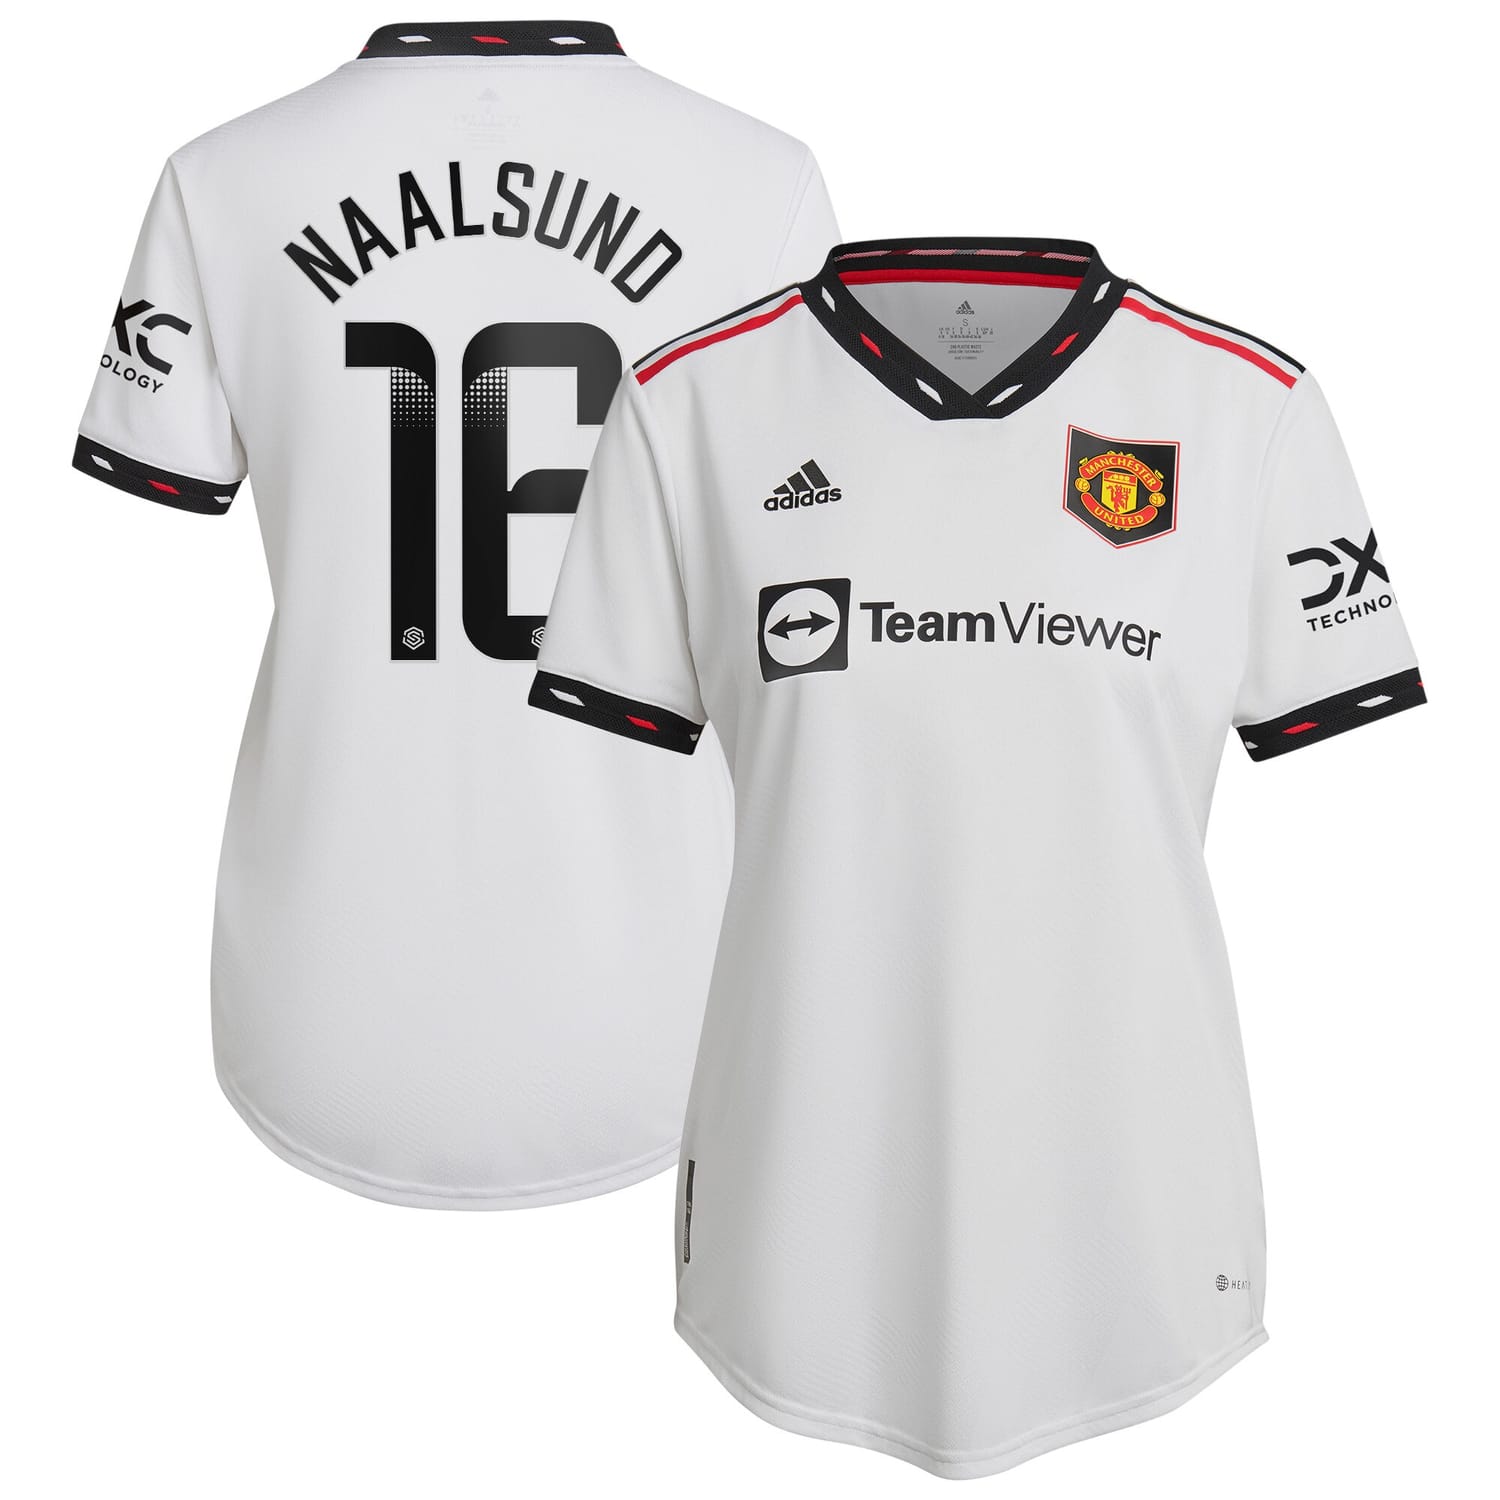 Premier League Manchester United Away WSL Authentic Jersey Shirt 2022-23 player Lisa Naalsund 16 printing for Women